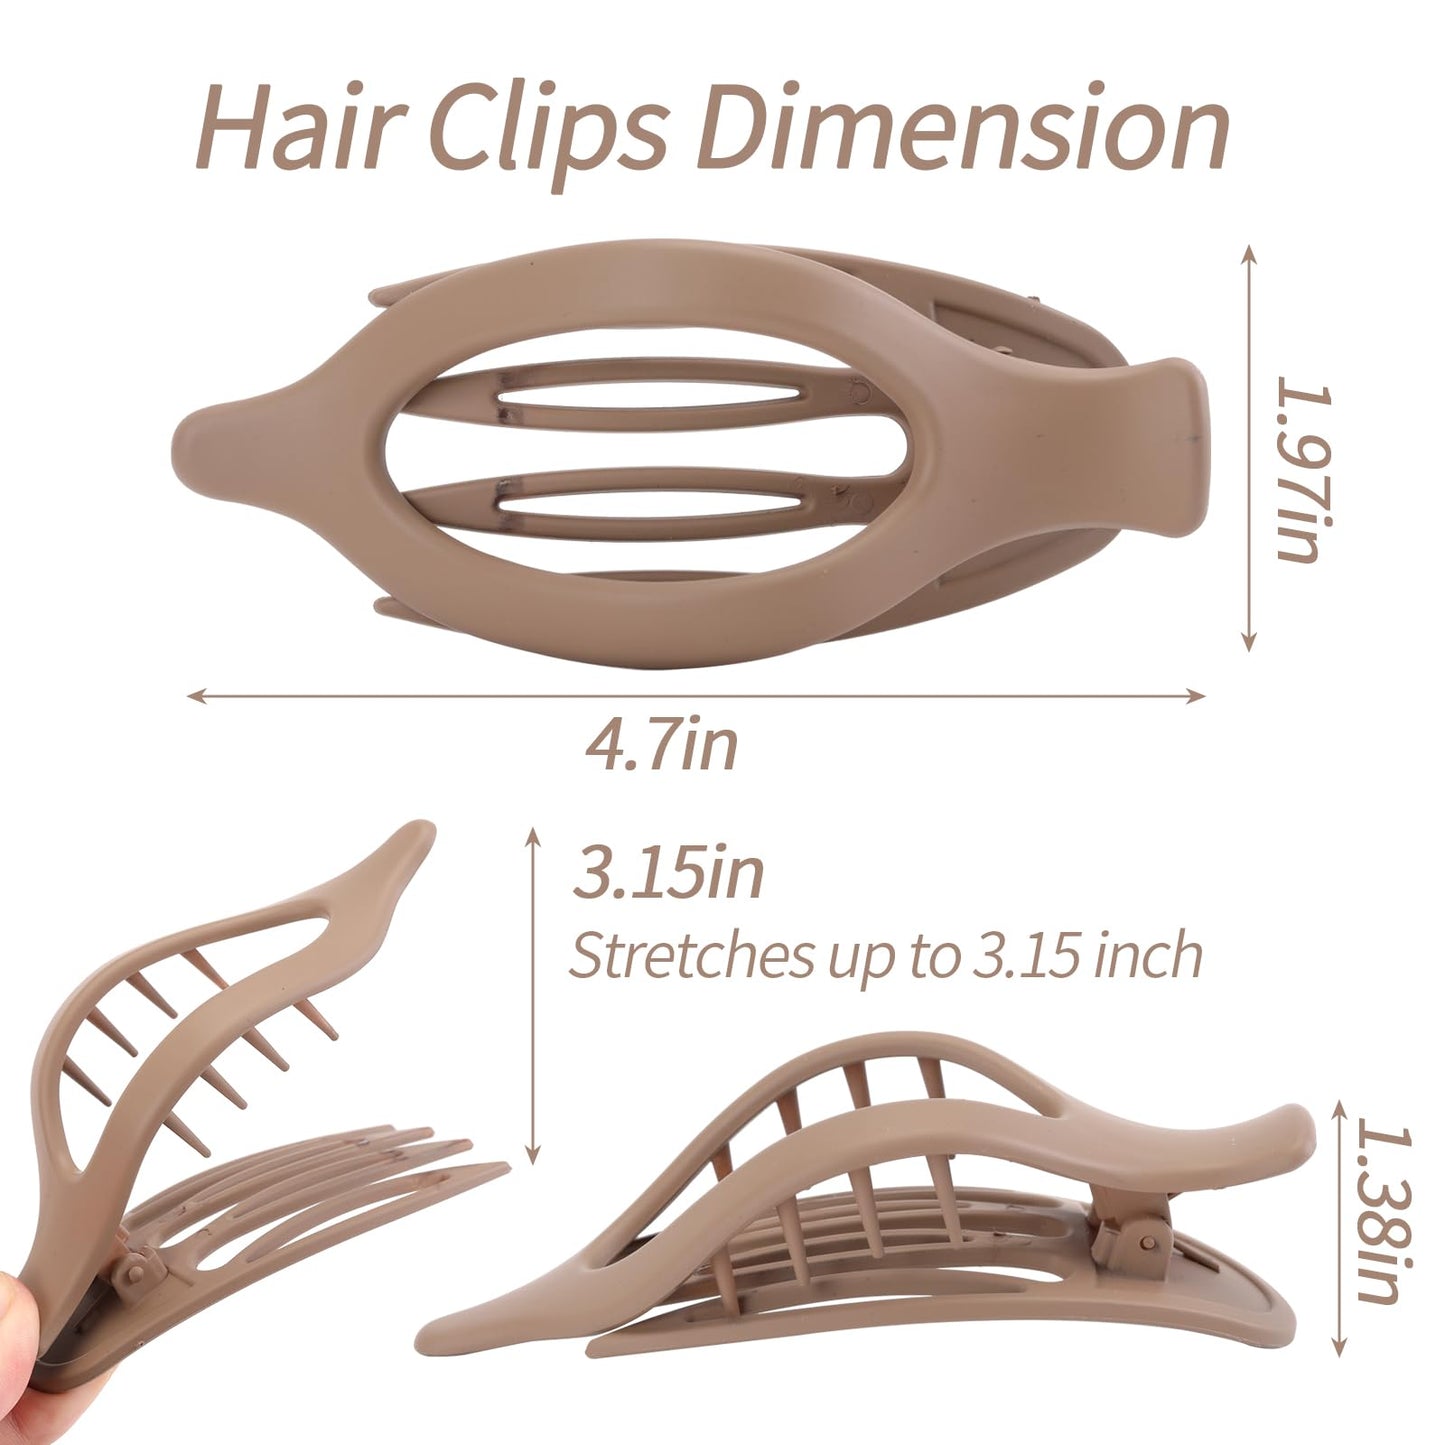 6 Packs Hair Clips, French Concord Flat Hair Clips, Curved Claw Clips for Women Girls, Alligator Clips for Thick Thin Hair, Strong Hold Duck Billed Clips,4.7 Inch Hair Barrettes for Styling Sectioning